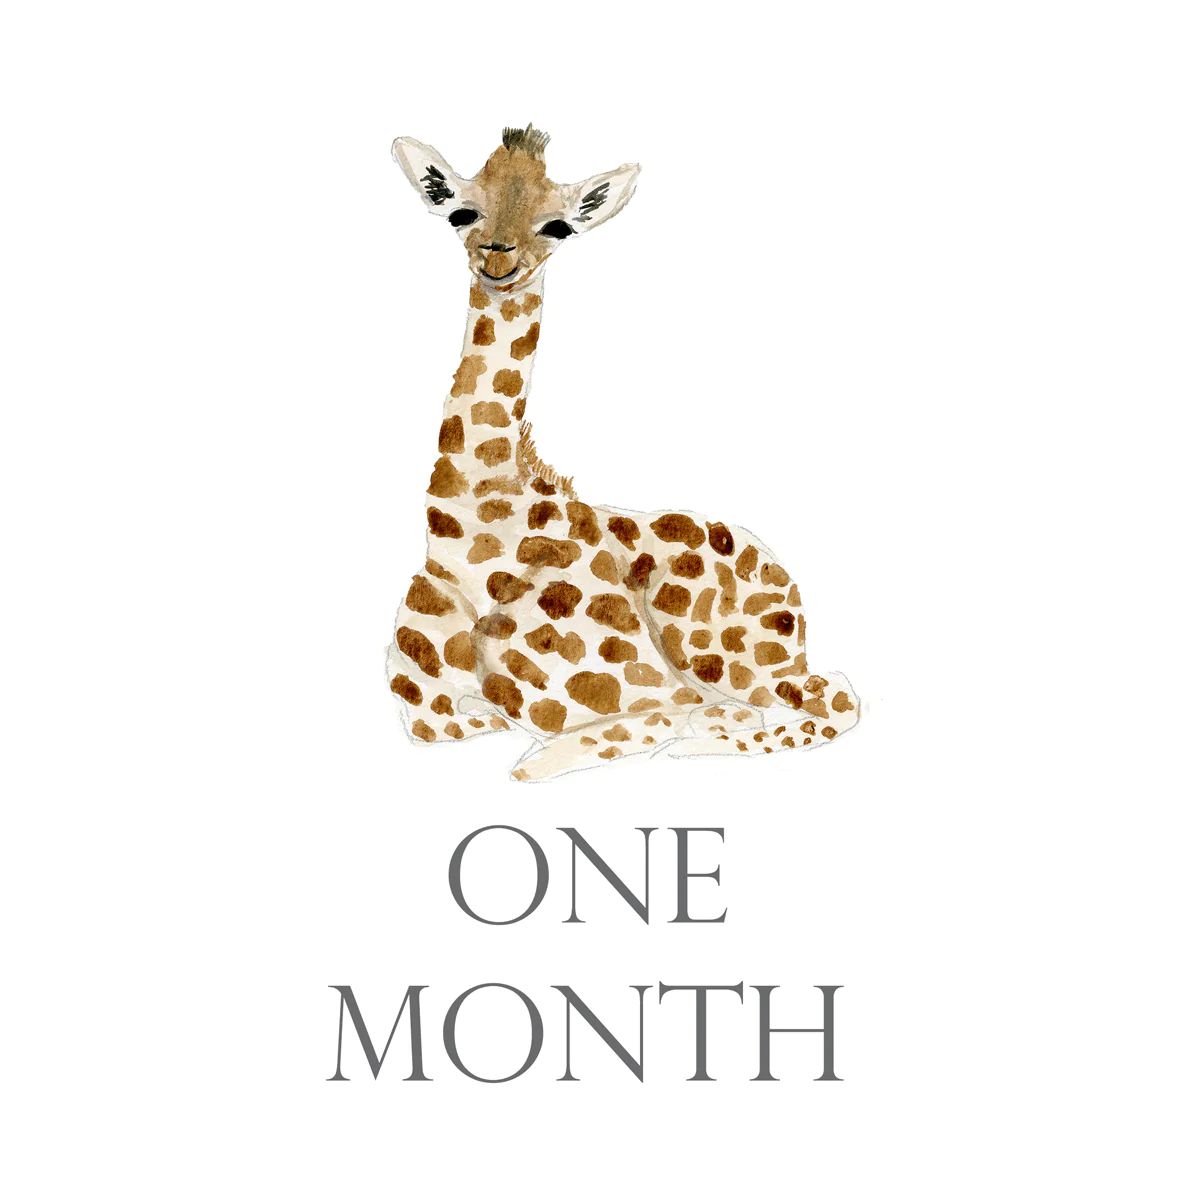 Baby Month Cards | White Elephant Designs